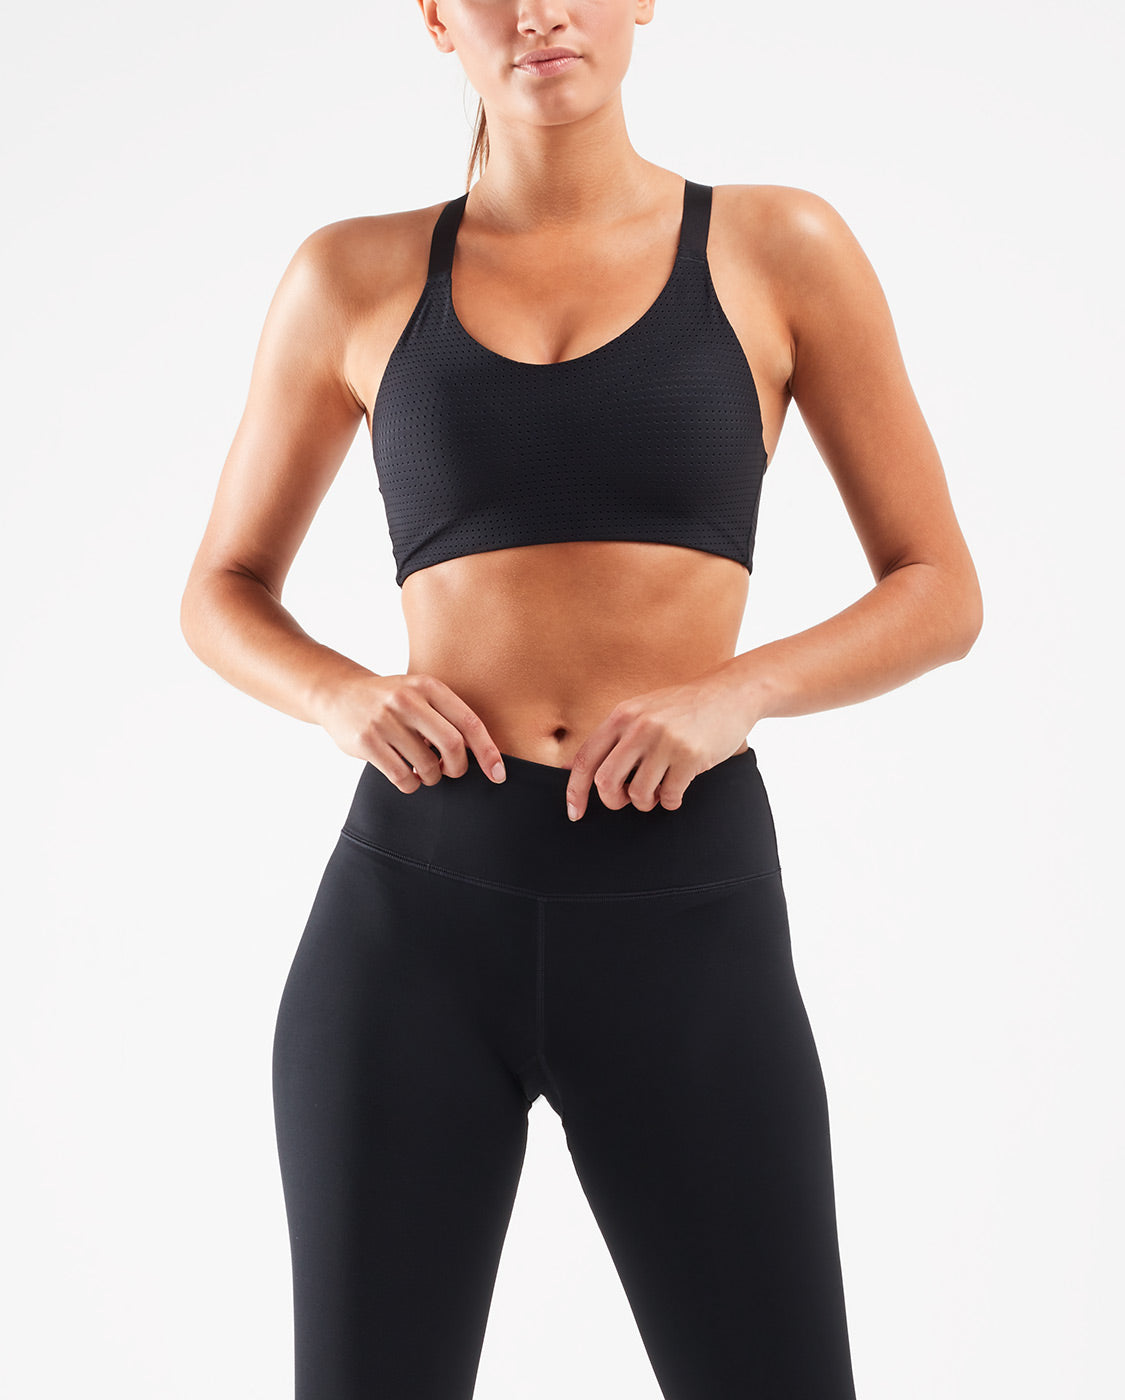 2XU South Africa on Instagram: Constructed from stretchy, breathable  fabric, the Aero Medium Impact Bra provides medium-impact support during  activities like running or HIIT, while staying comfortable for all day  wear. ⁠ ⁠